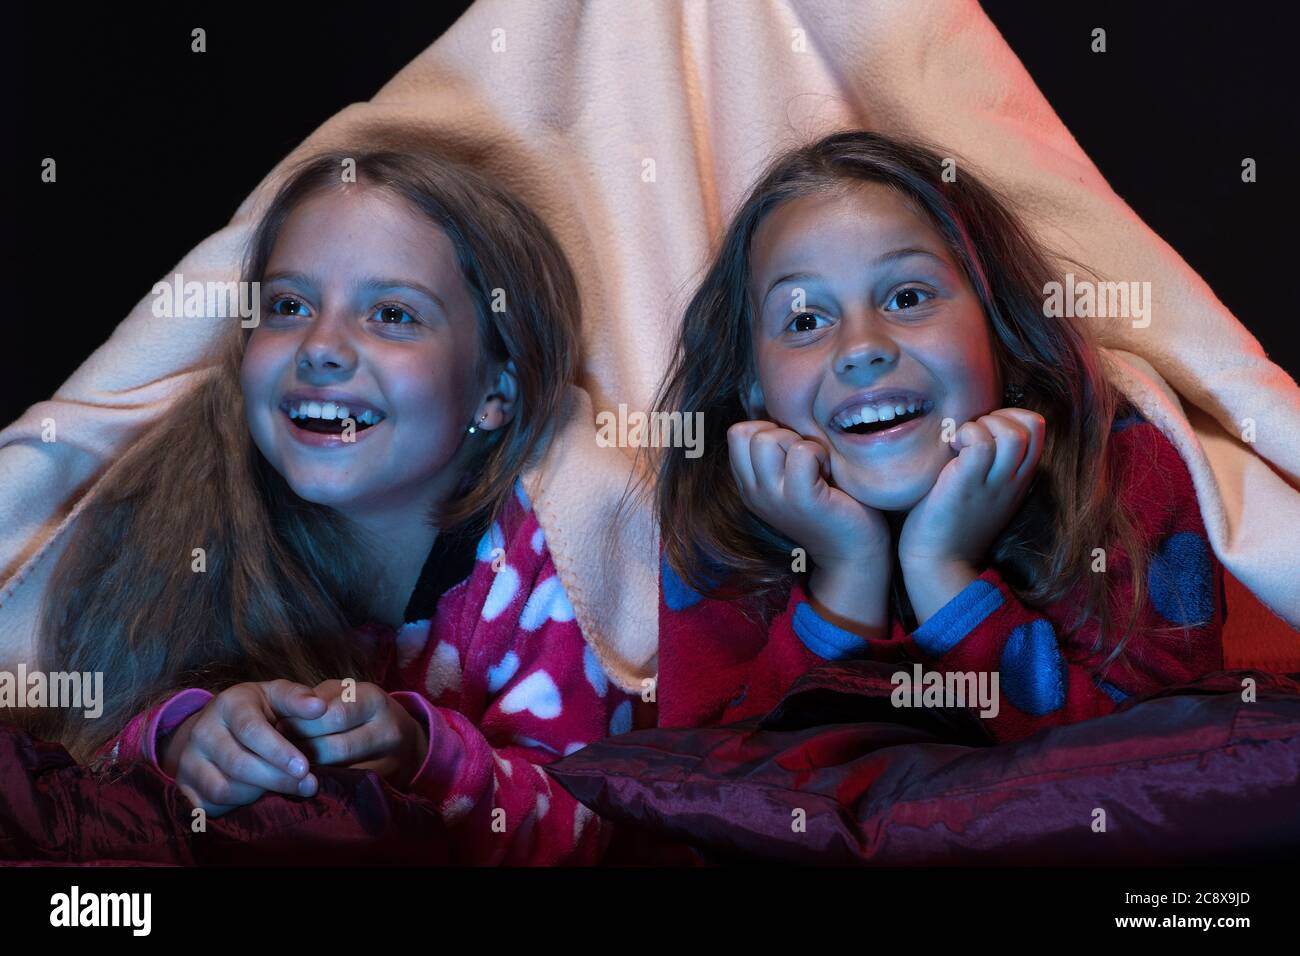 Children and fun time concept. Girls with excited faces. Girl friends watching TV in blanket tent. Kids wearing red jammies in bed on black background. PJs party for children. Stock Photo